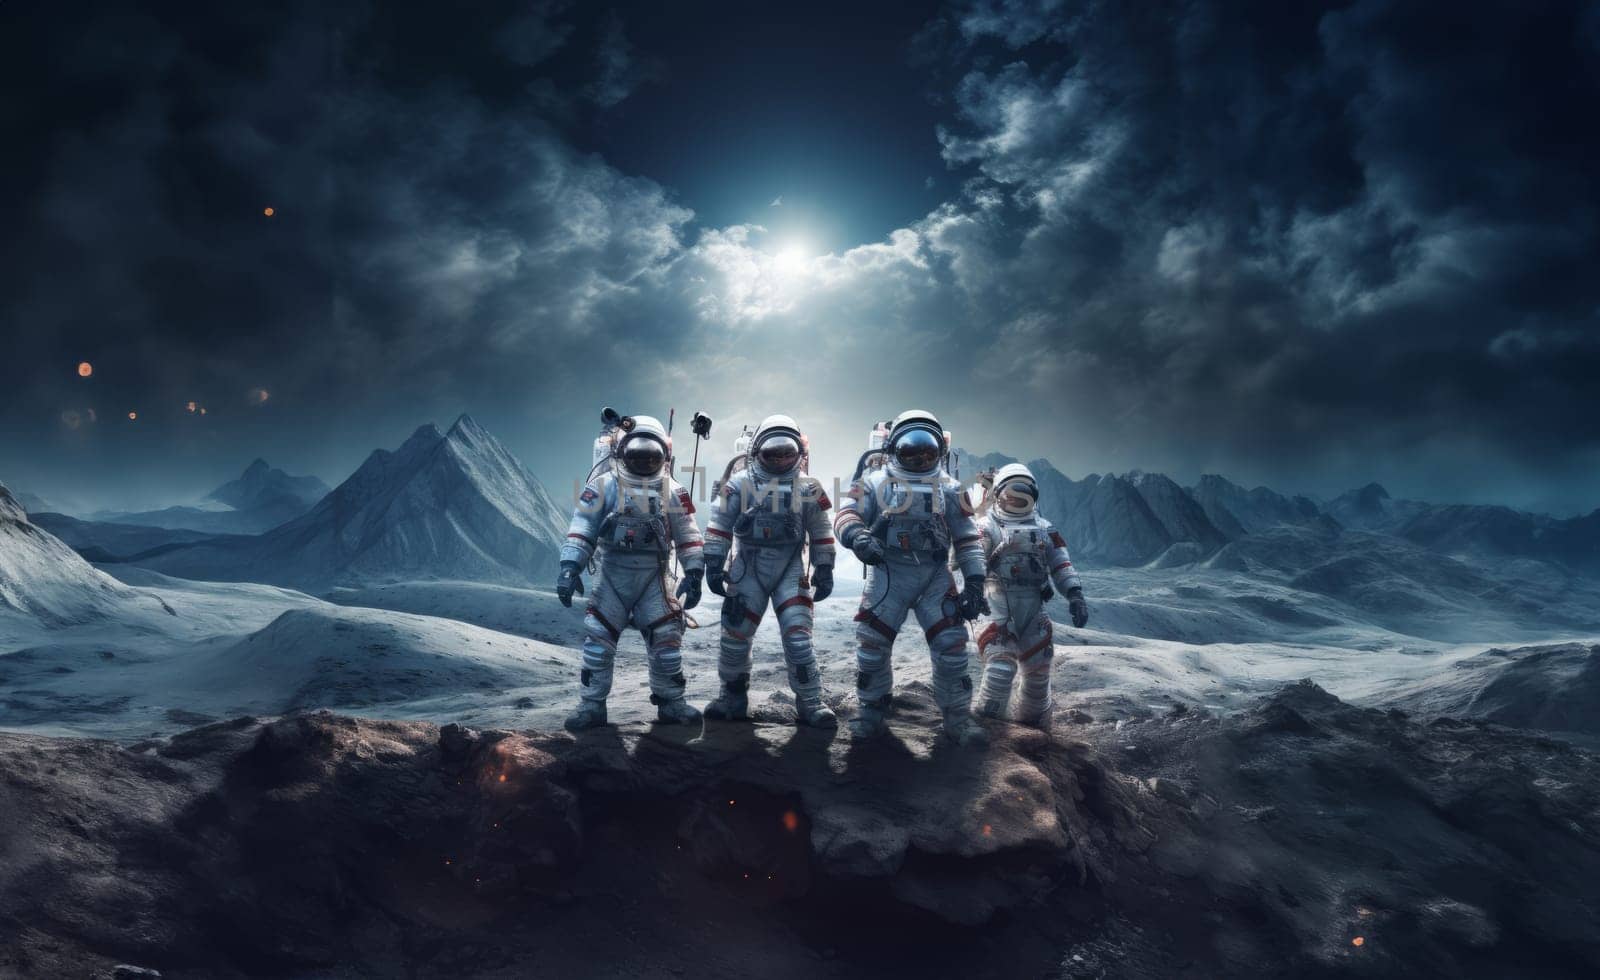 Astronauts Explore the Lunar Surface on a Grand Expedition.Generated image by dotshock